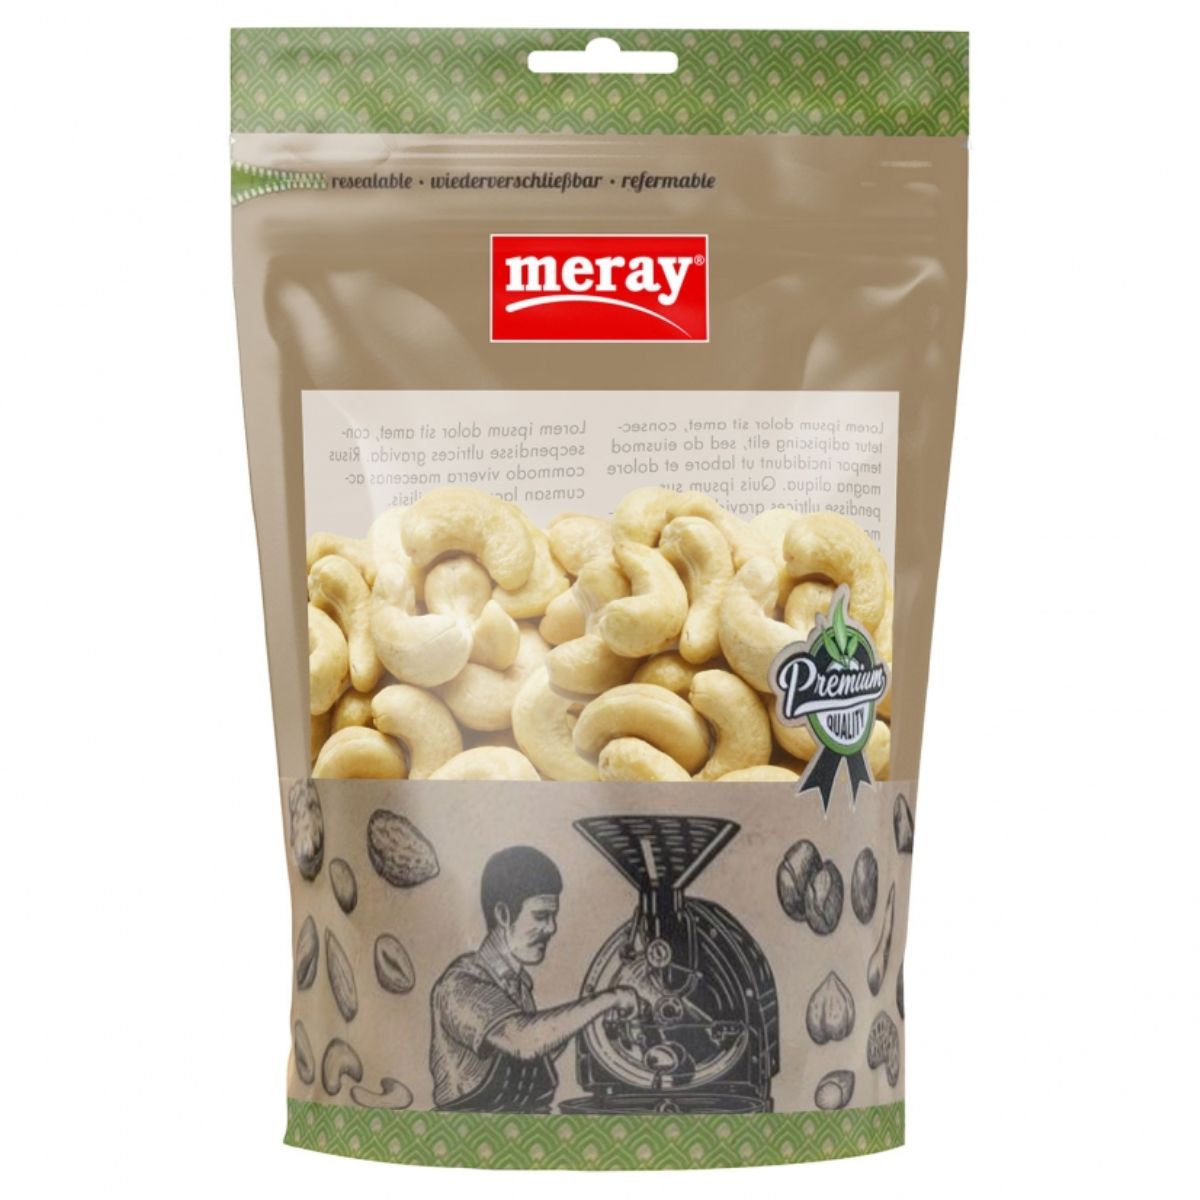 Meray - Cashew Kernels Raw - 150g in a bag on a white background.